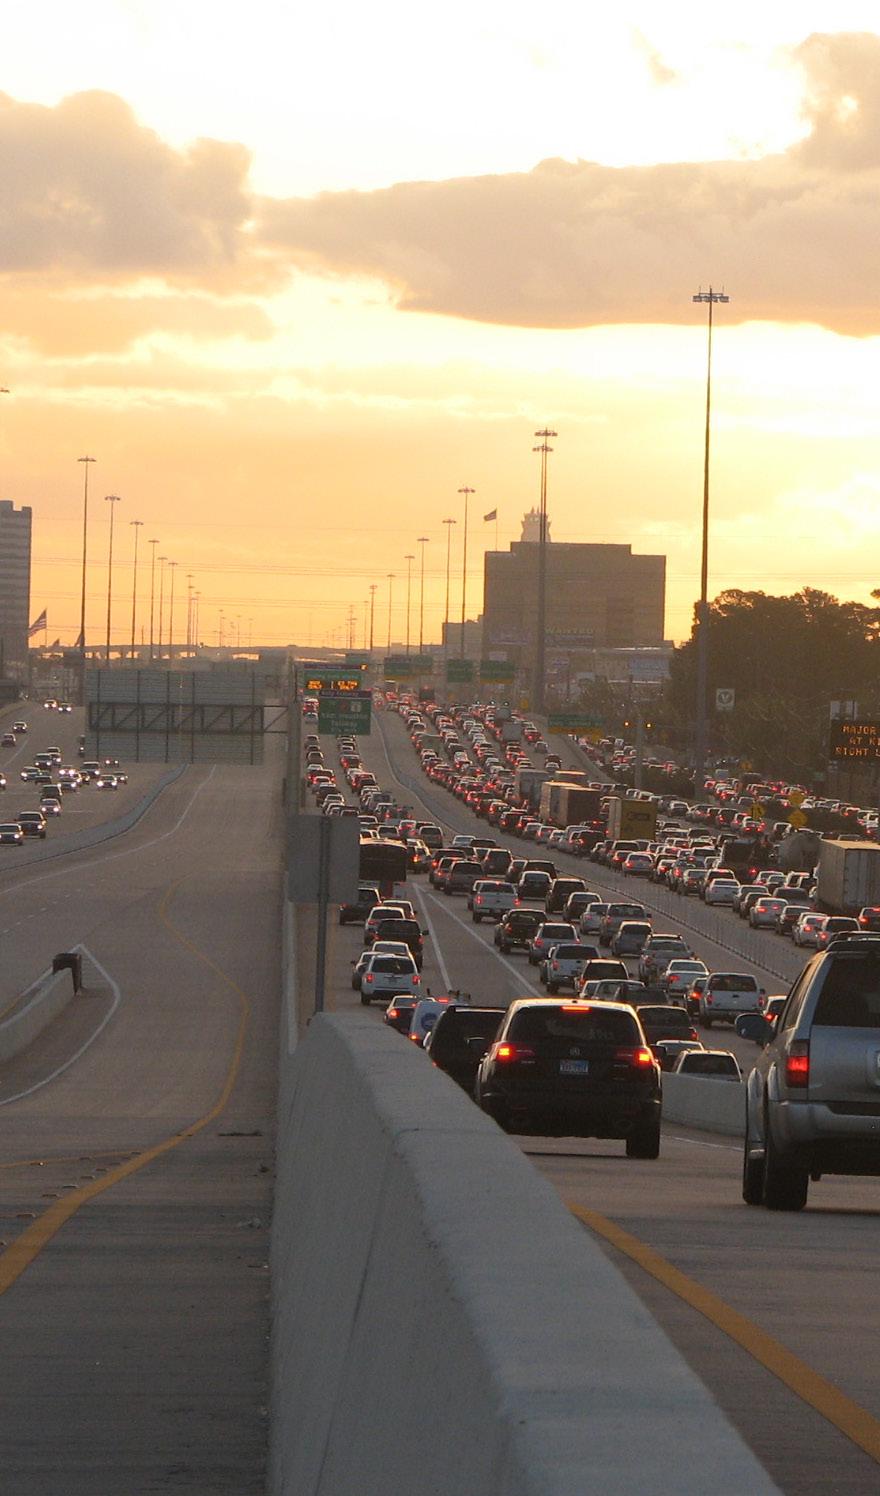 1 BRIEFING PAPER: TOWARD A BEST PRACTICE MODEL FOR MANAGED LANES IN TEXAS by Ginger Goodin Division Head, Planning Texas A&M Transportation Institute Stacey Bricka Research Scientist Texas A&M